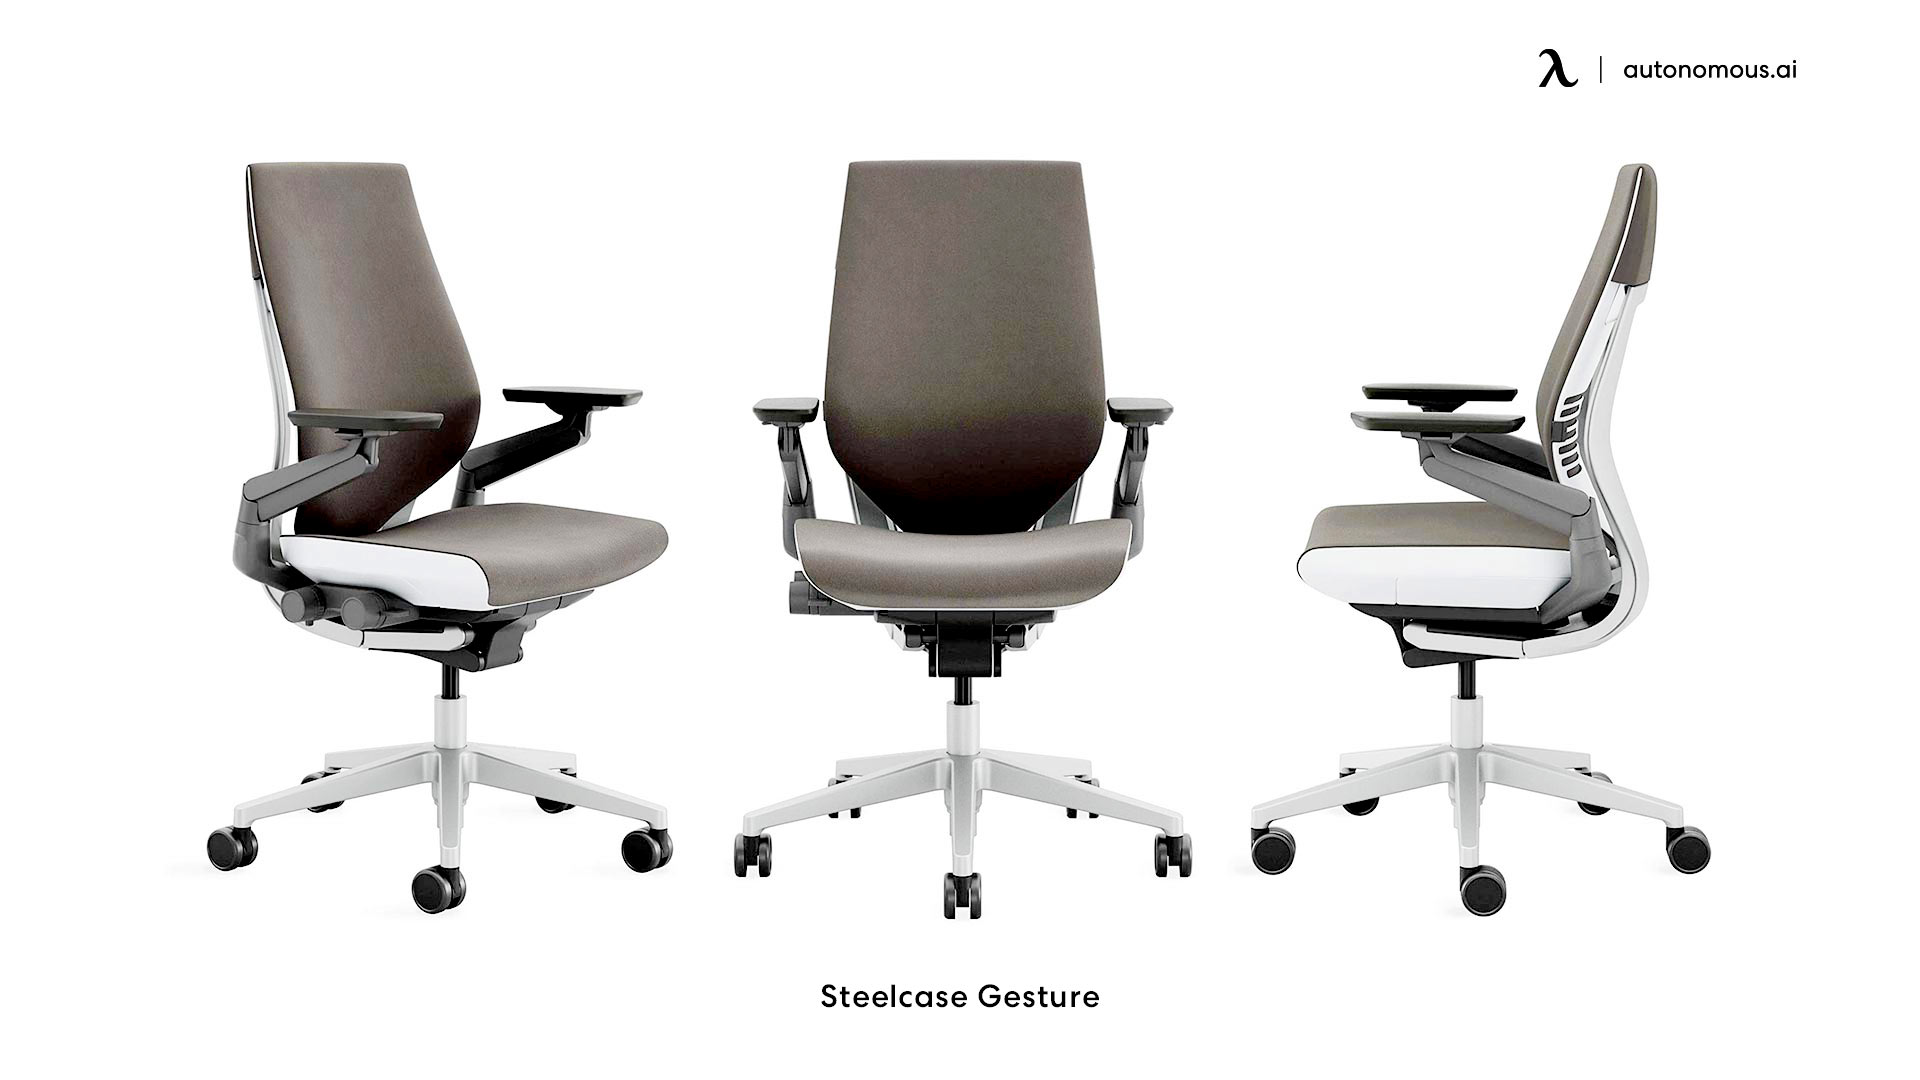 Steelcase Gesture office chair for 300 lbs